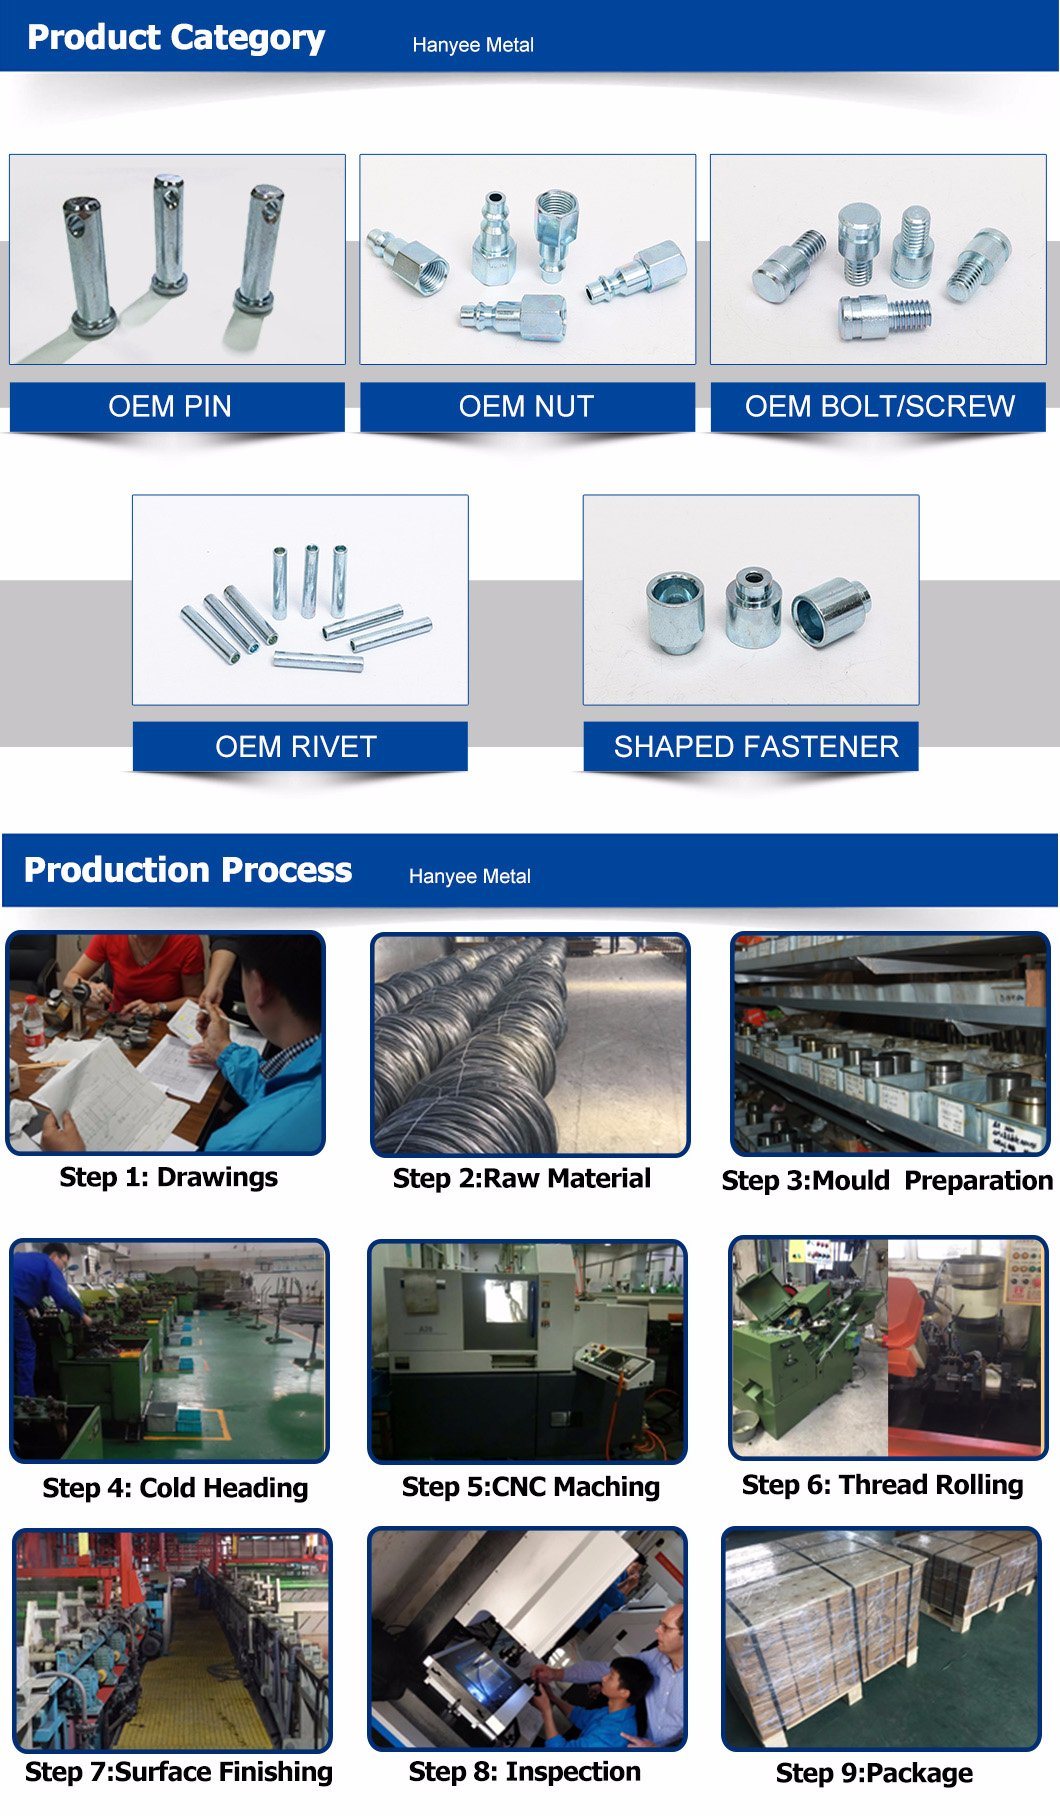 Custom-Made Qualified Ni Plated Types of Nut